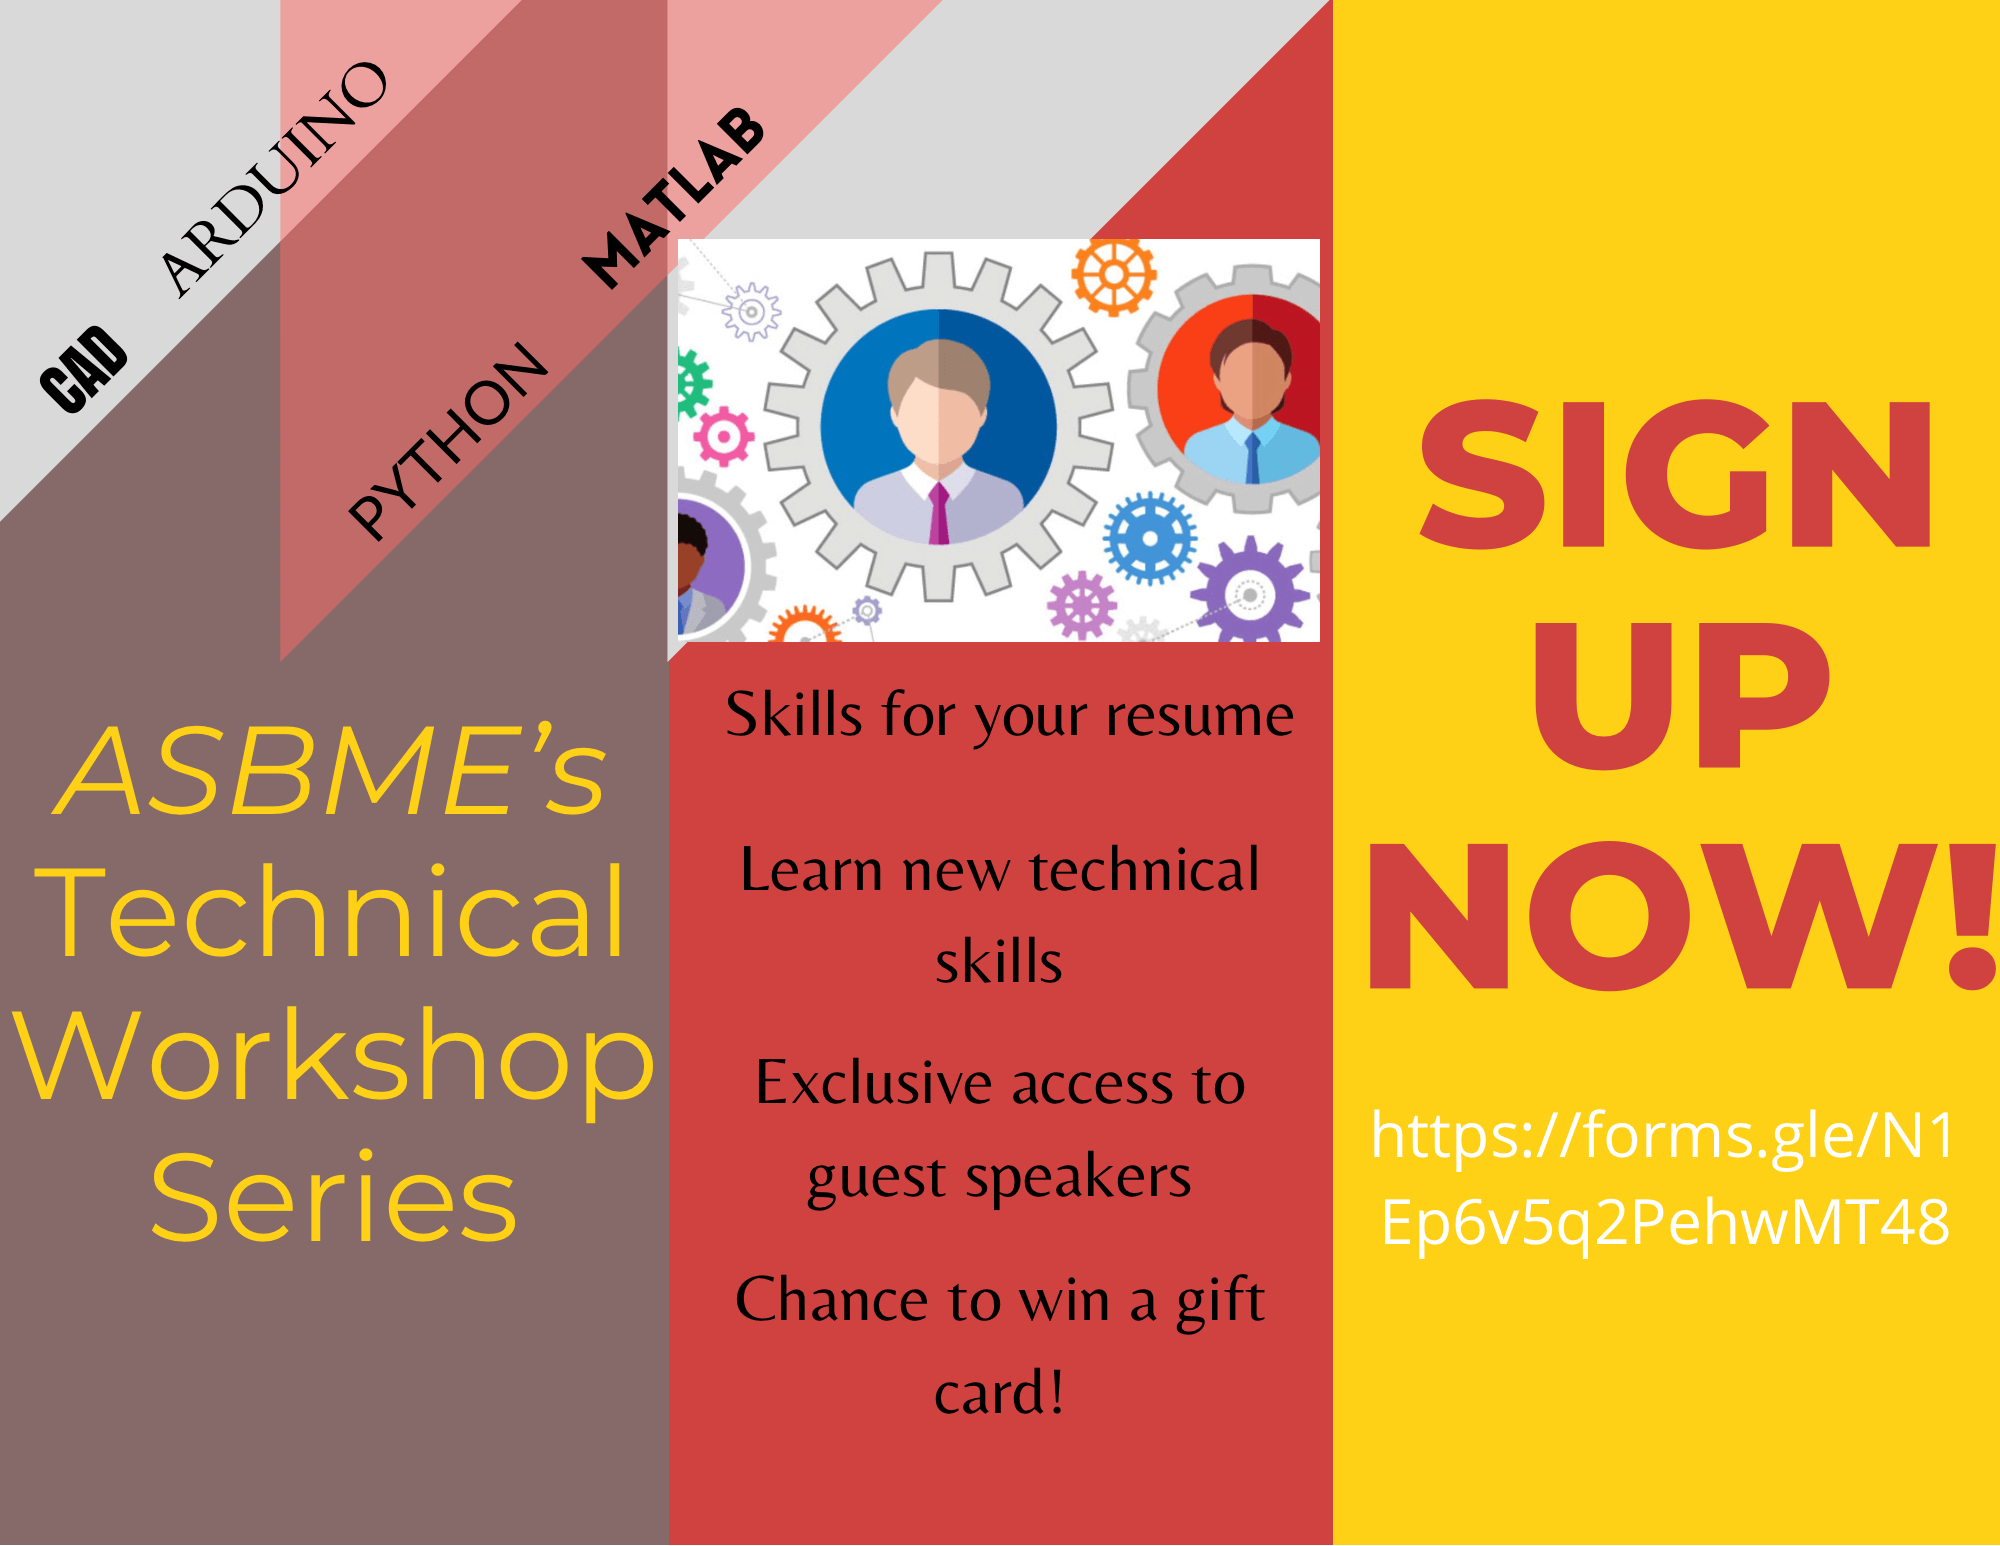 Featured image for “ASBME’s Technical Workshop Series”